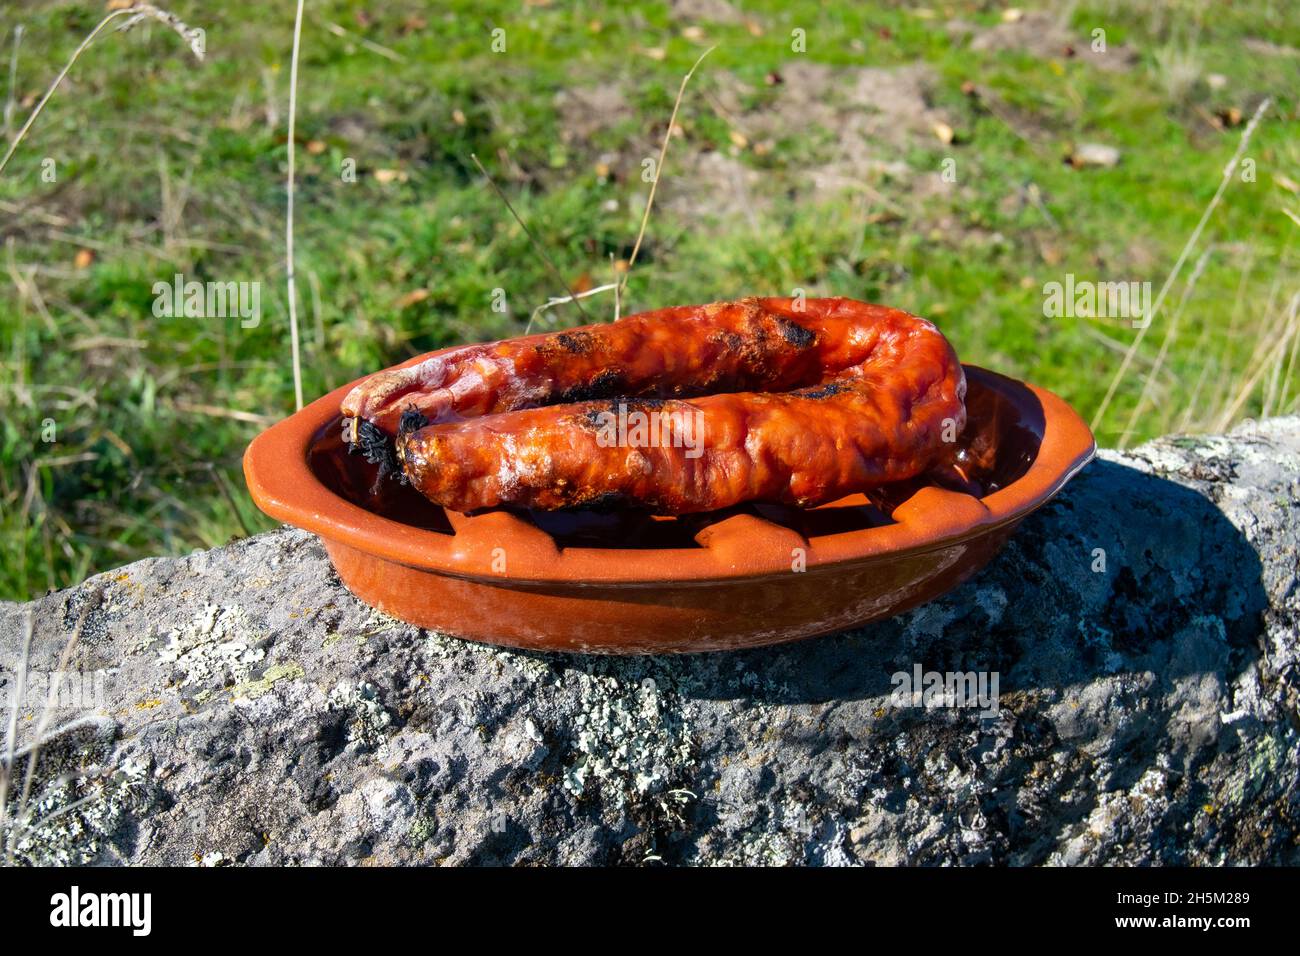 Grilled chorizo on outdoor landscape, camping and outdoor living lifestyle. Freedom and discovering natural ways of living. Petiscos de Portugal chouriça. Stock Photo